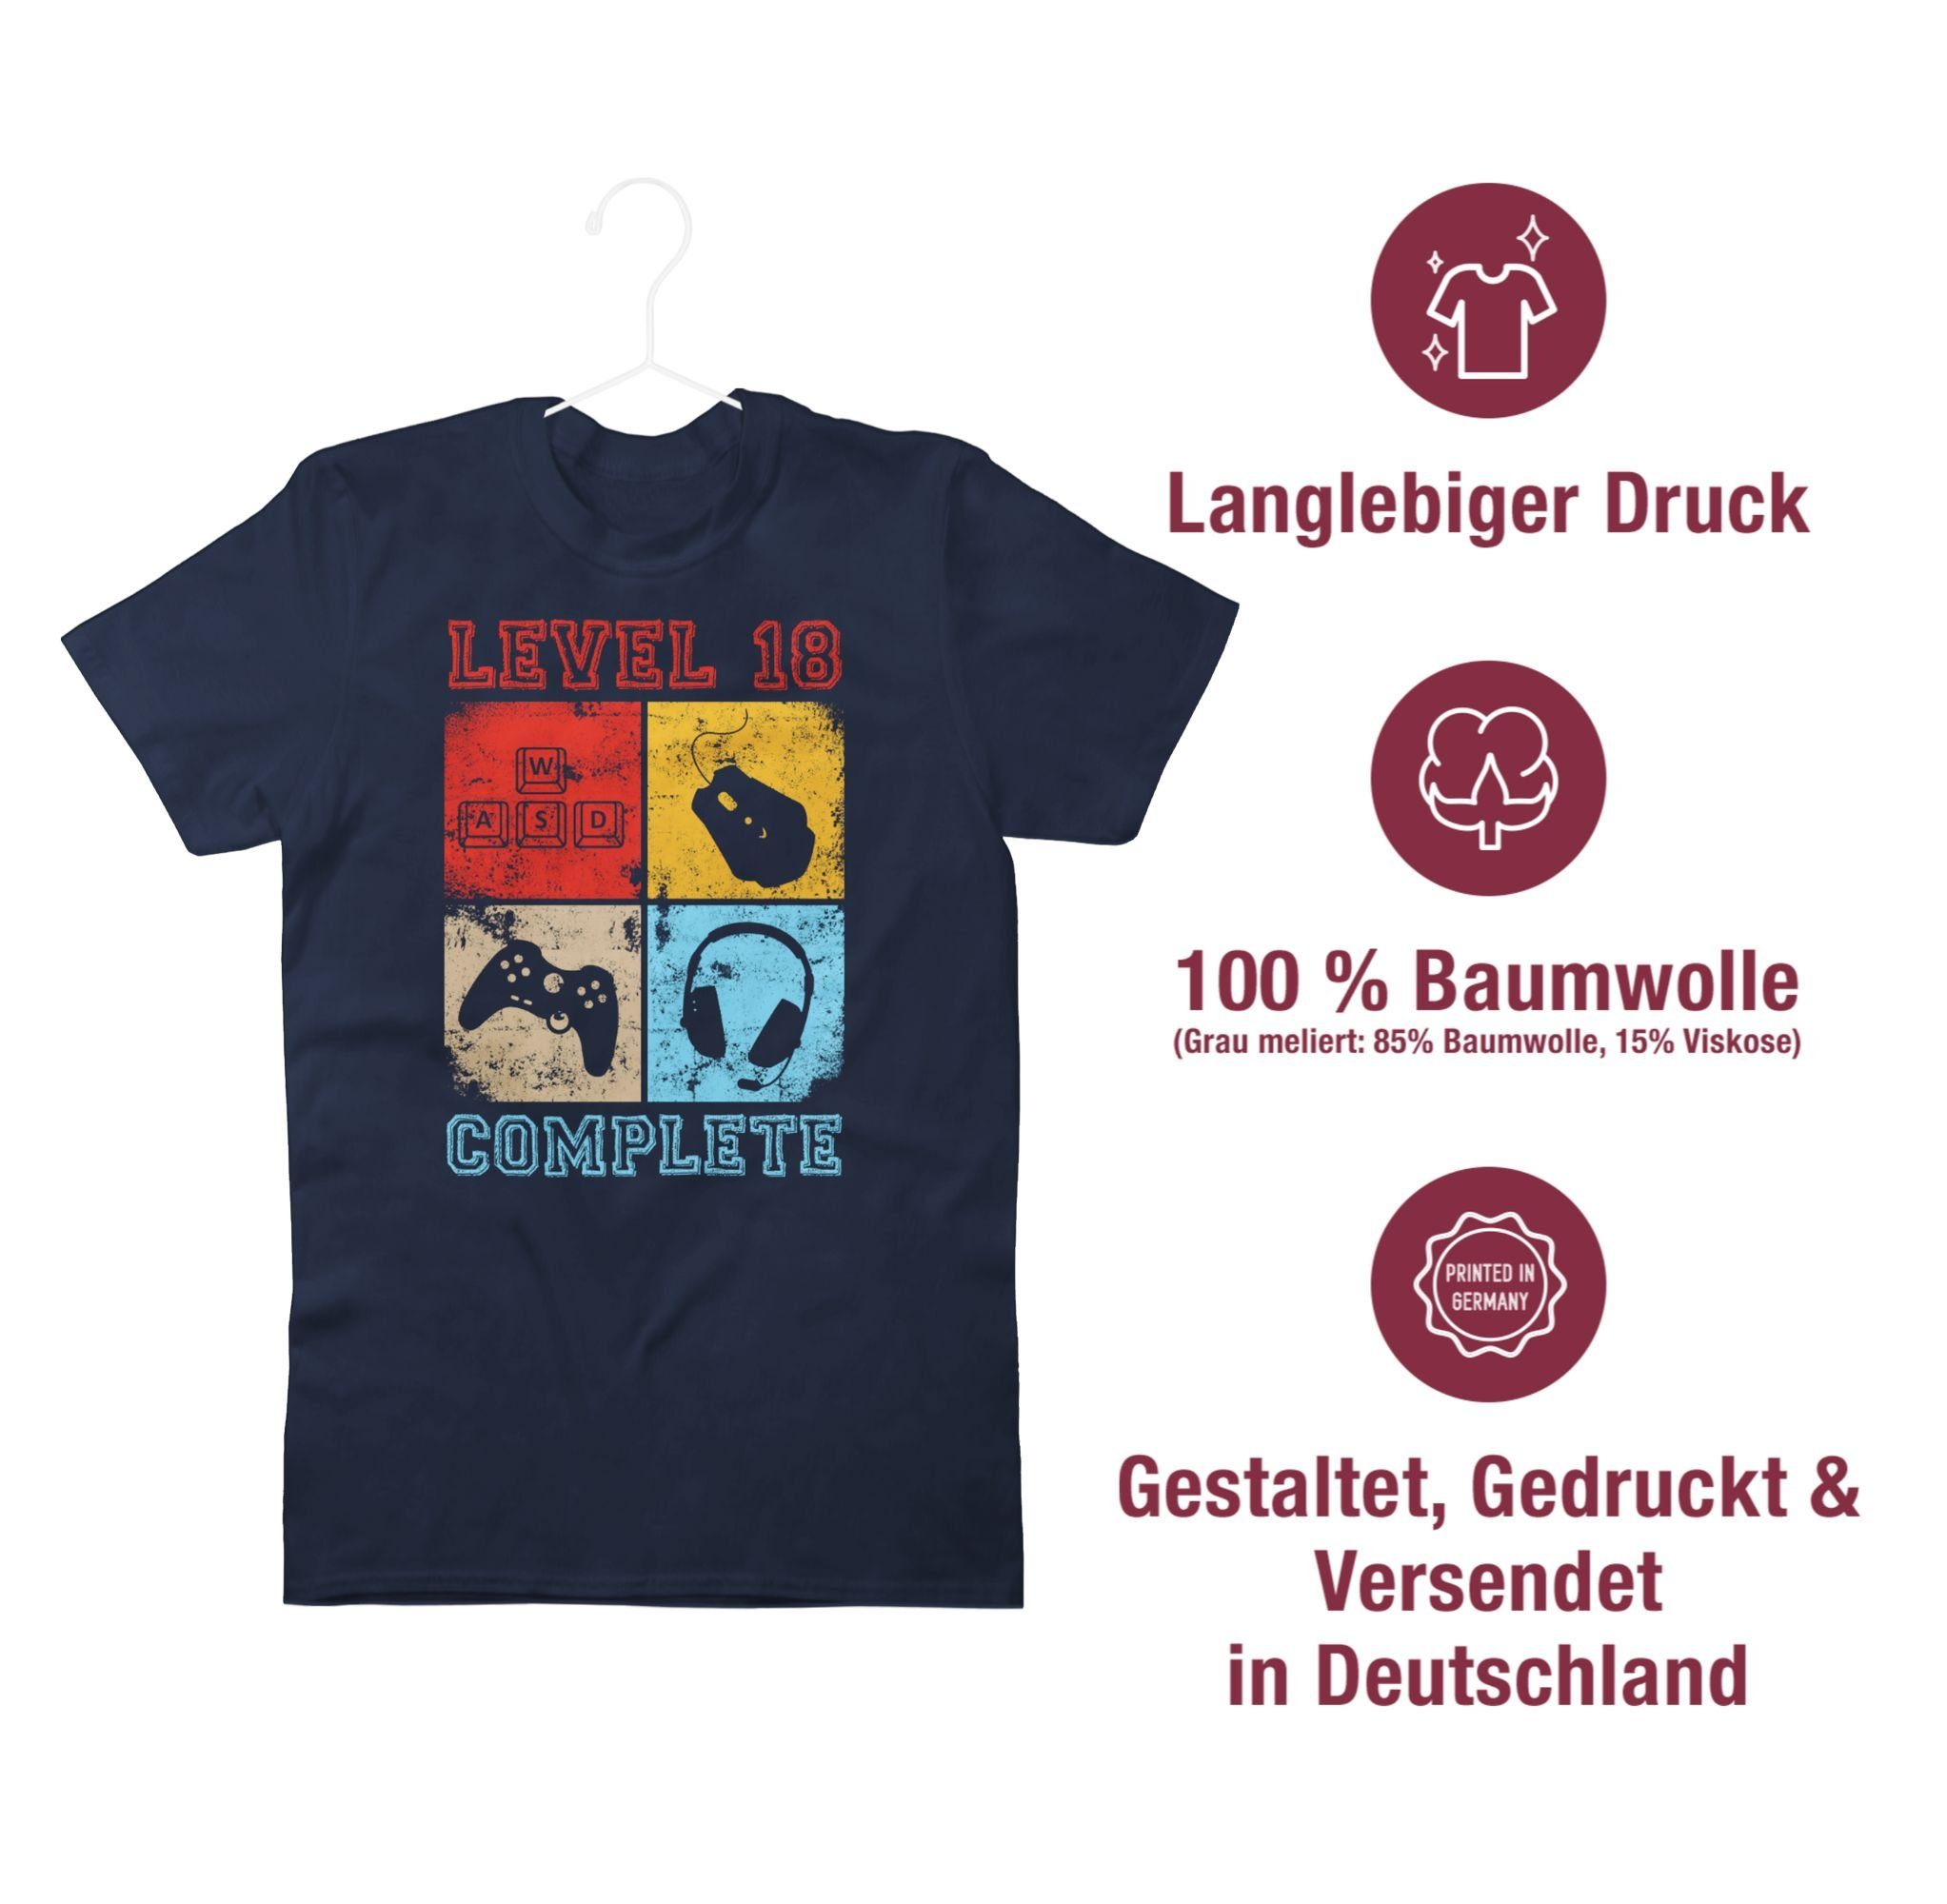 Level 02 Geburtstag T-Shirt Completed Shirtracer Blau Complete Navy 18. 18